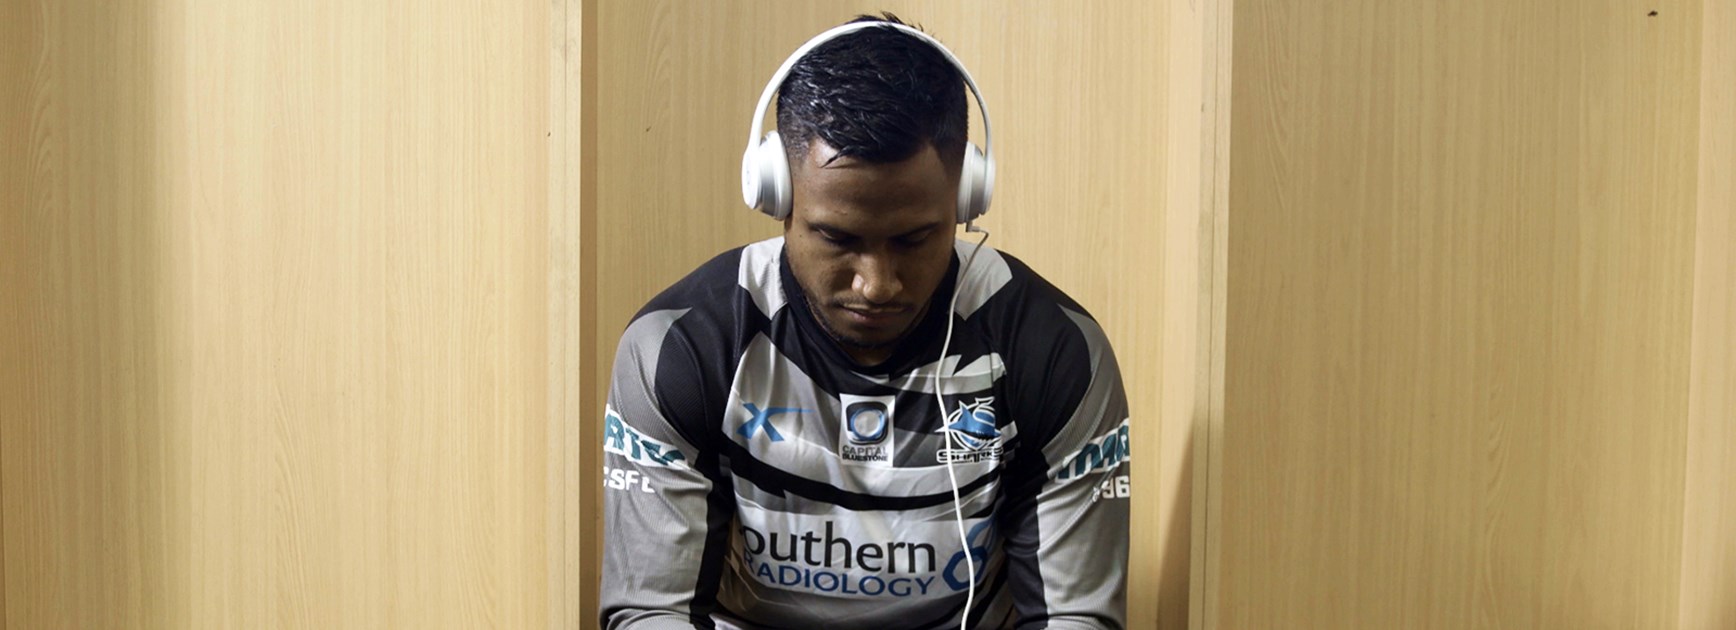 Cronulla Sharks fullback Ben Barba listening to his Apple Music playlists during the Telstra Premiership finals.